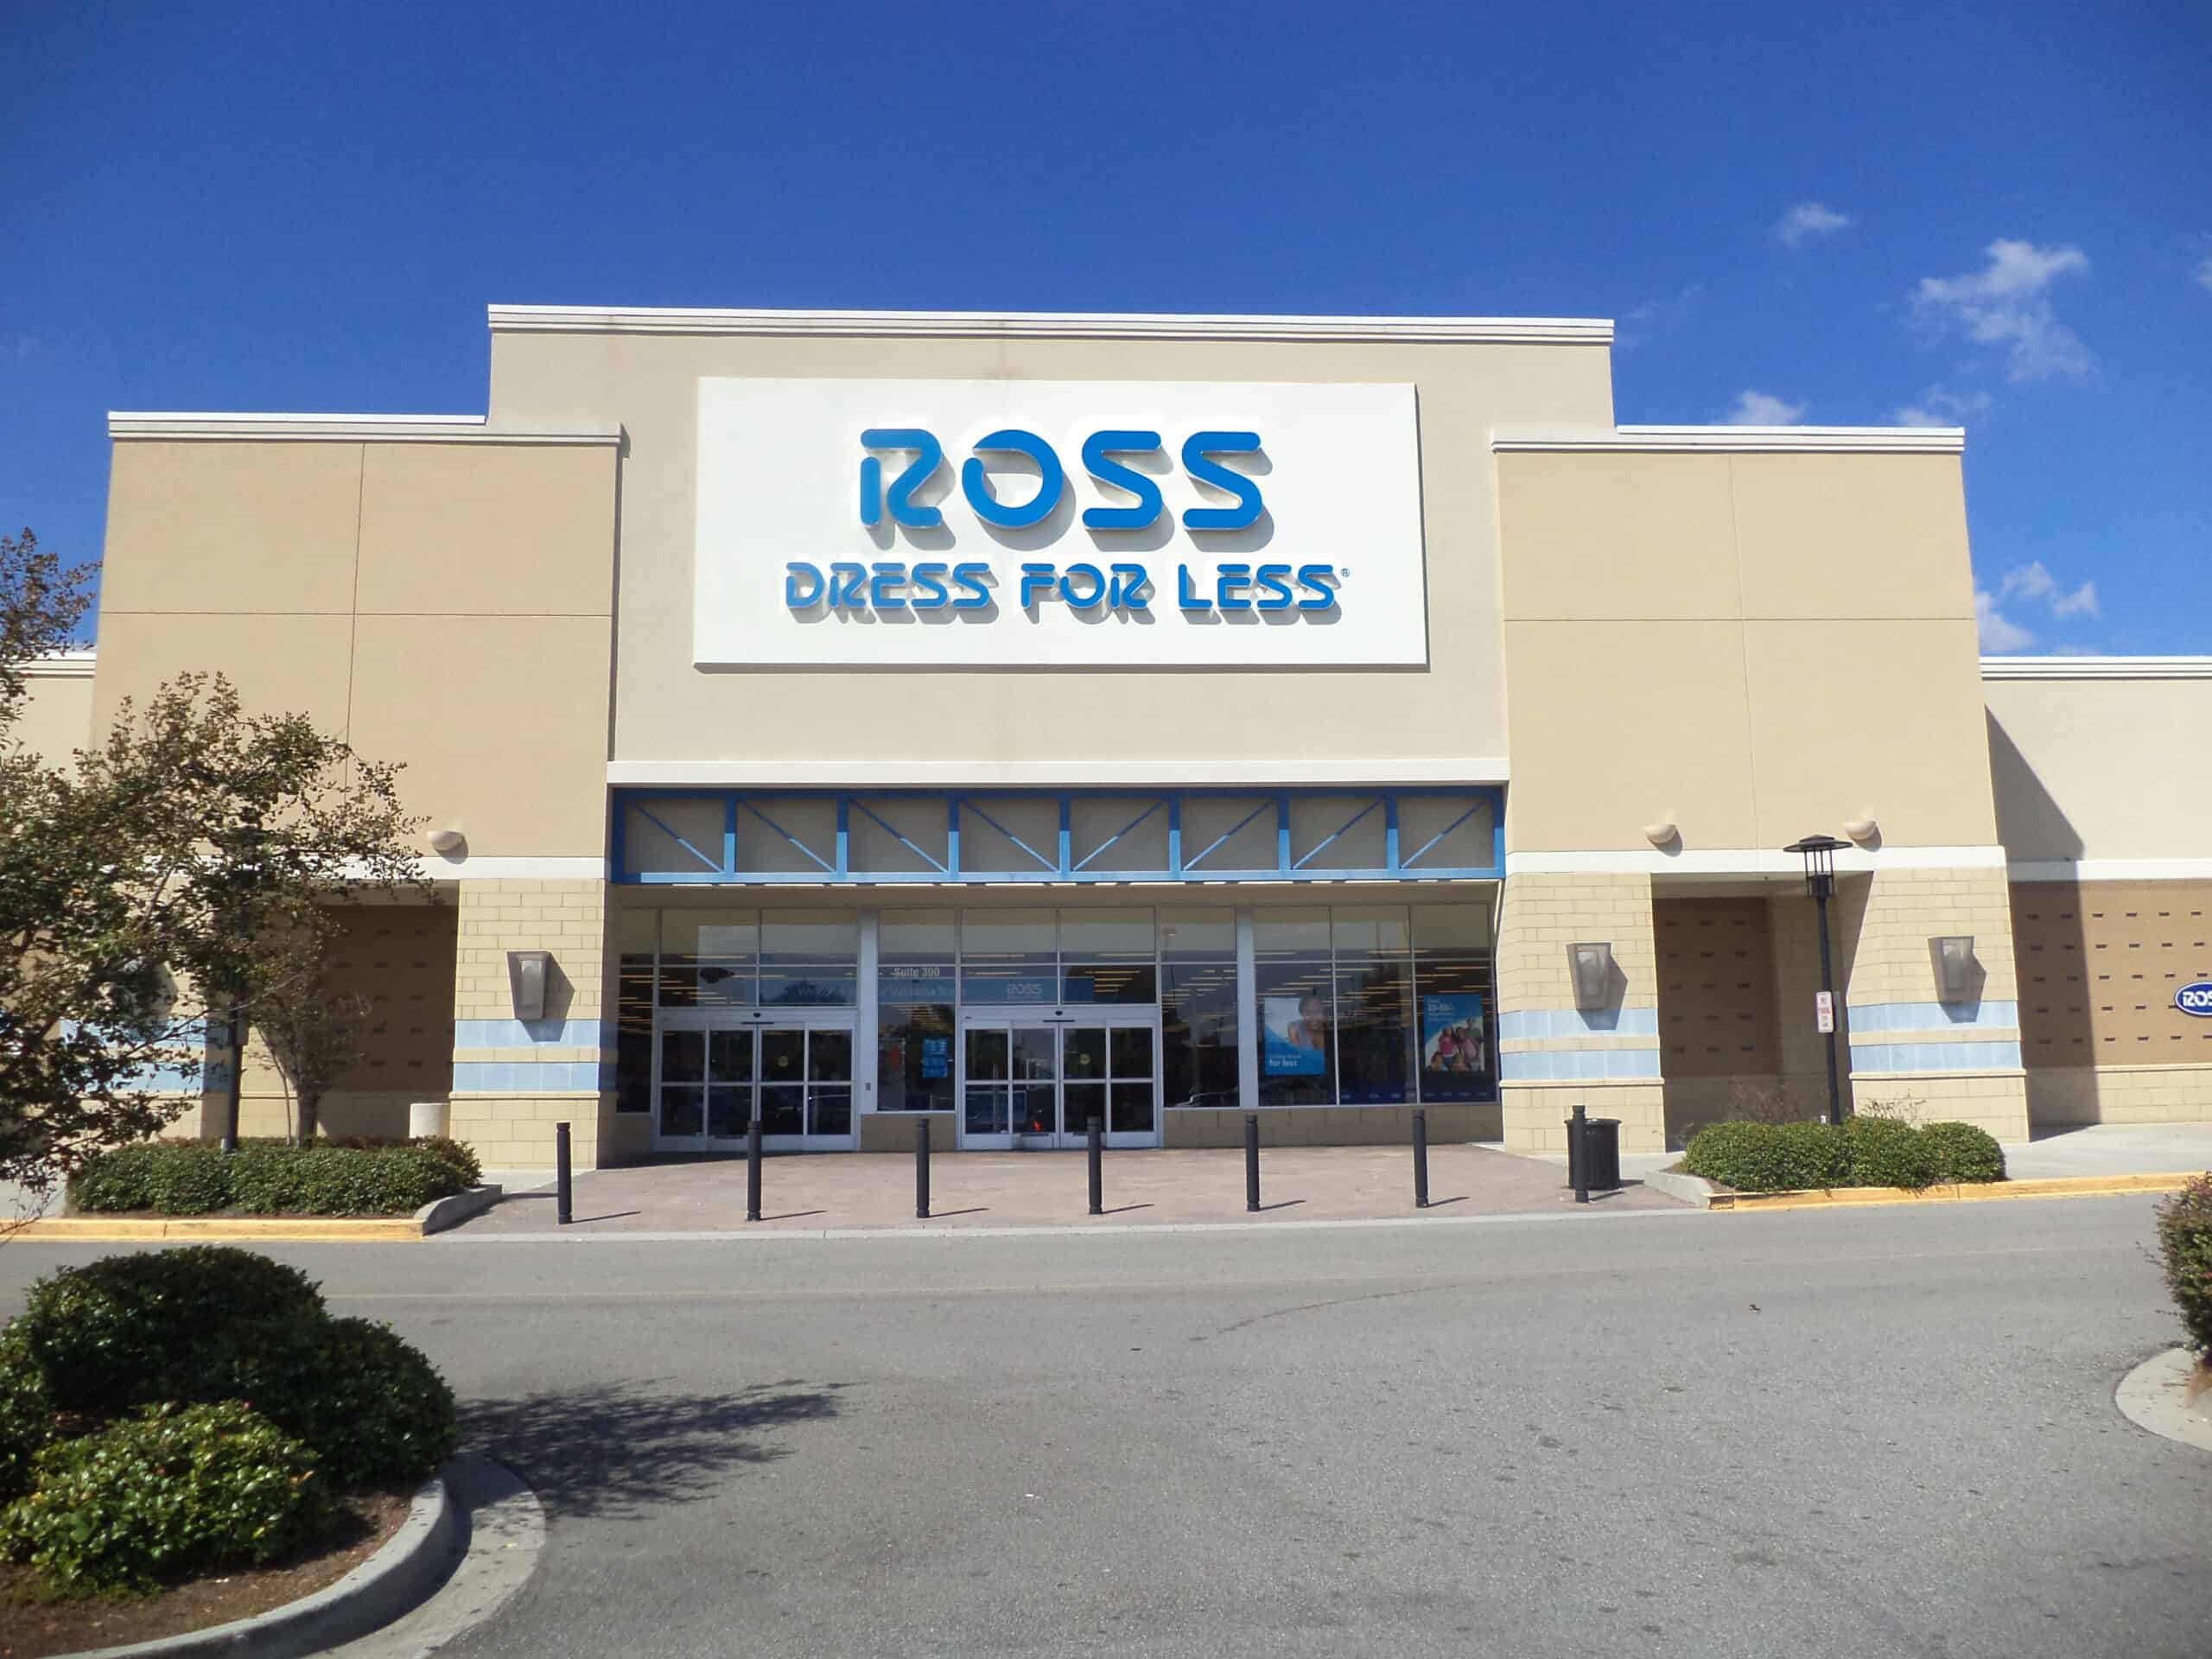 Ross Dress for Less opening in October in Normal